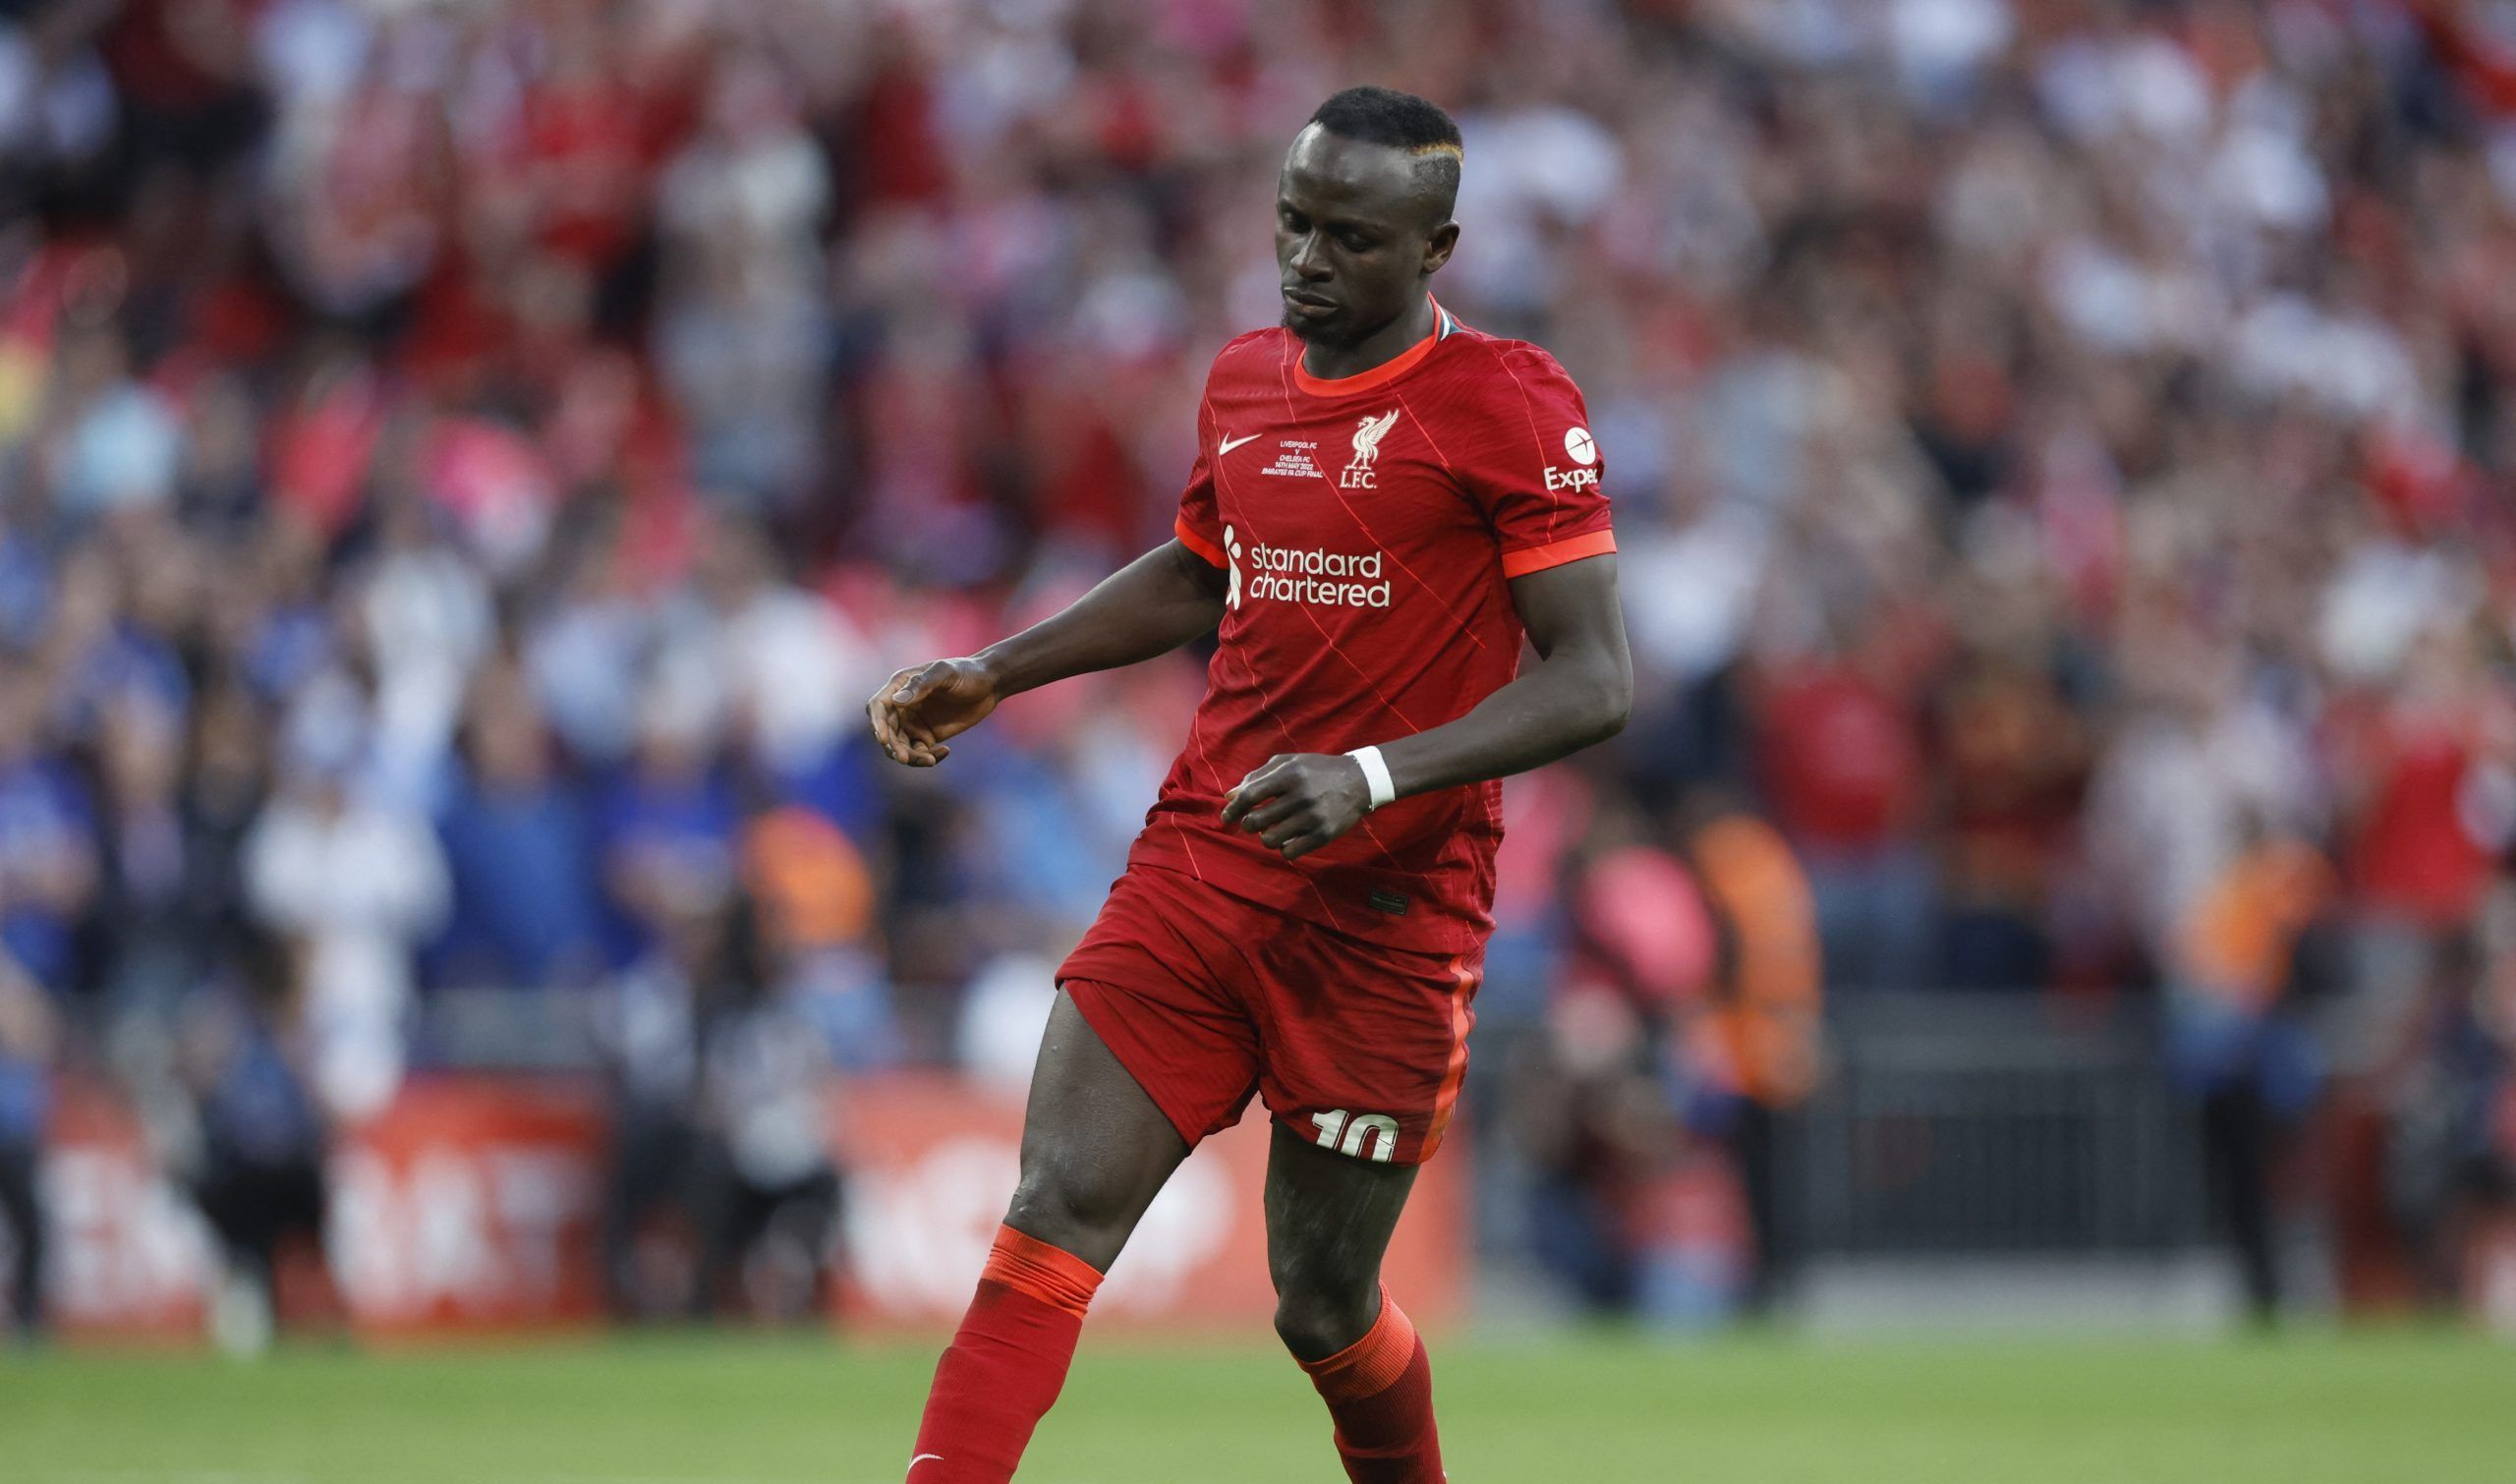 Soccer Football - FA Cup - Final - Chelsea v Liverpool - Wembley Stadium, London, Britain - May 14, 2022 Liverpool's Sadio Mane looks dejected after missing a penalty during the shoot-out Action Images via Reuters/Peter Cziborra